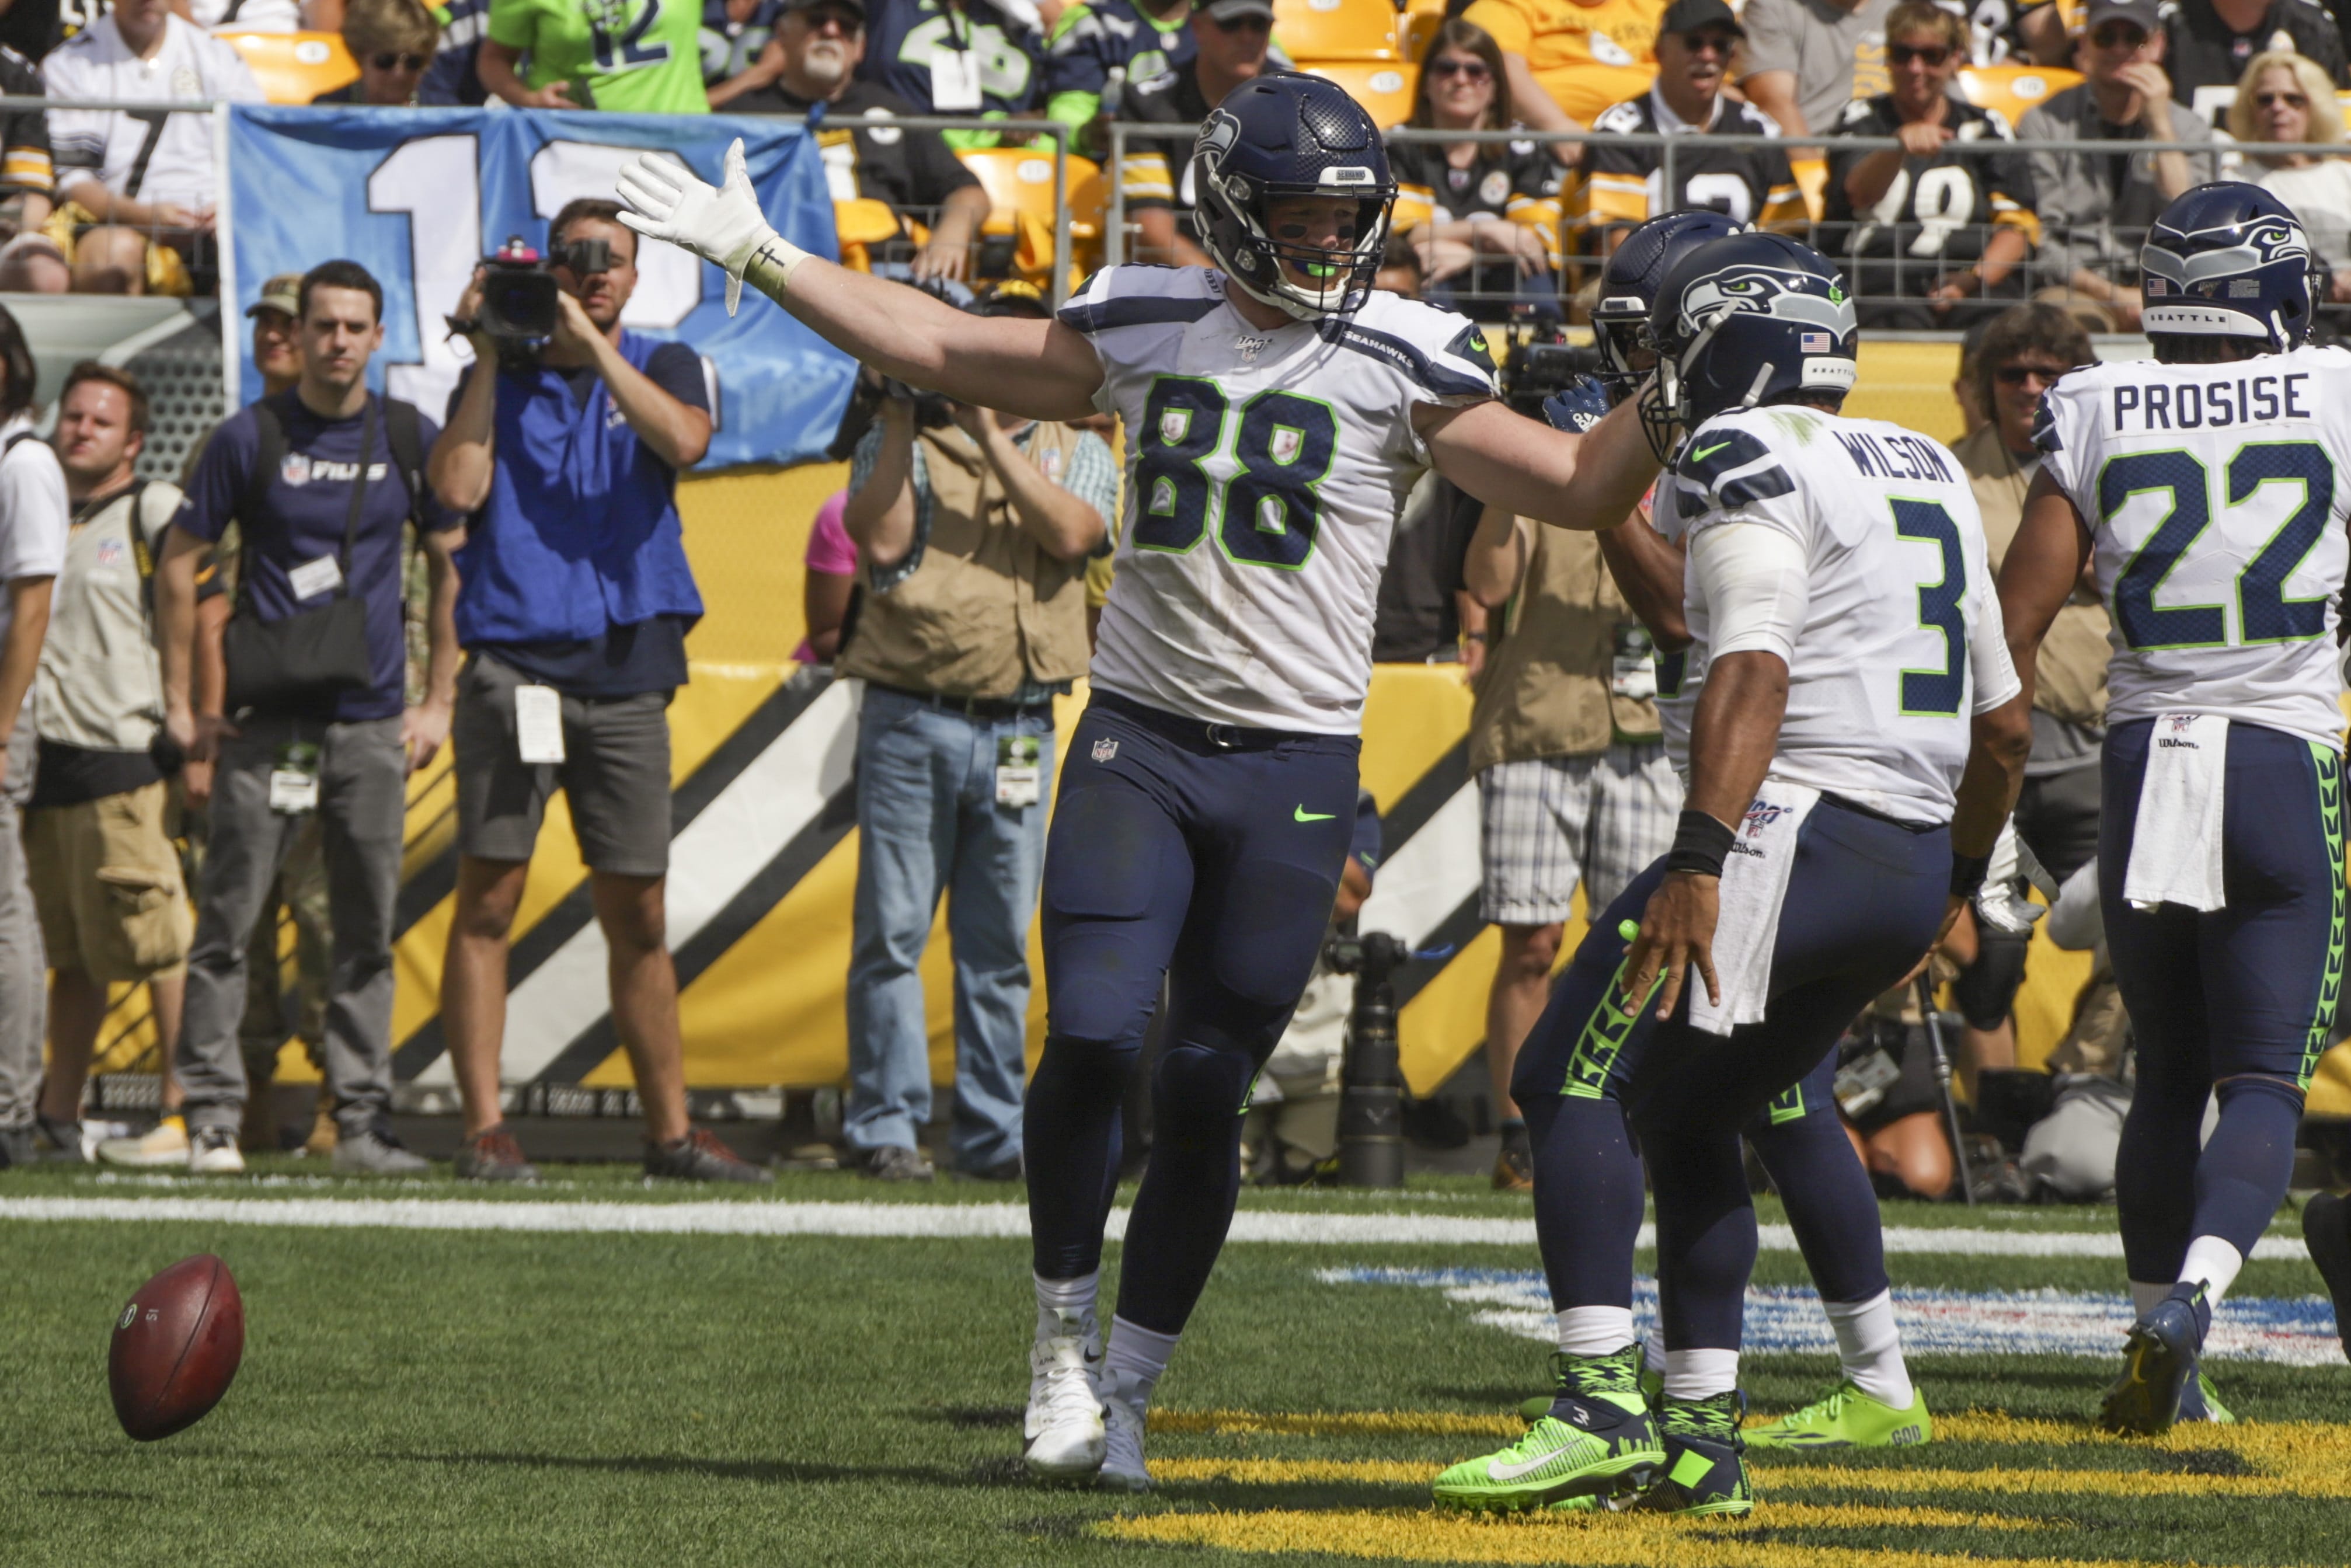 Seattle Seahawks tight end Will Dissly (88) celebrates with quarterback Russell Wilson (3) after making a touchdown catch against the Pittsburgh Steelers in the first half of an NFL football game, Sunday, Sept. 15, 2019, in Pittsburgh. (AP Photo/Gene J.